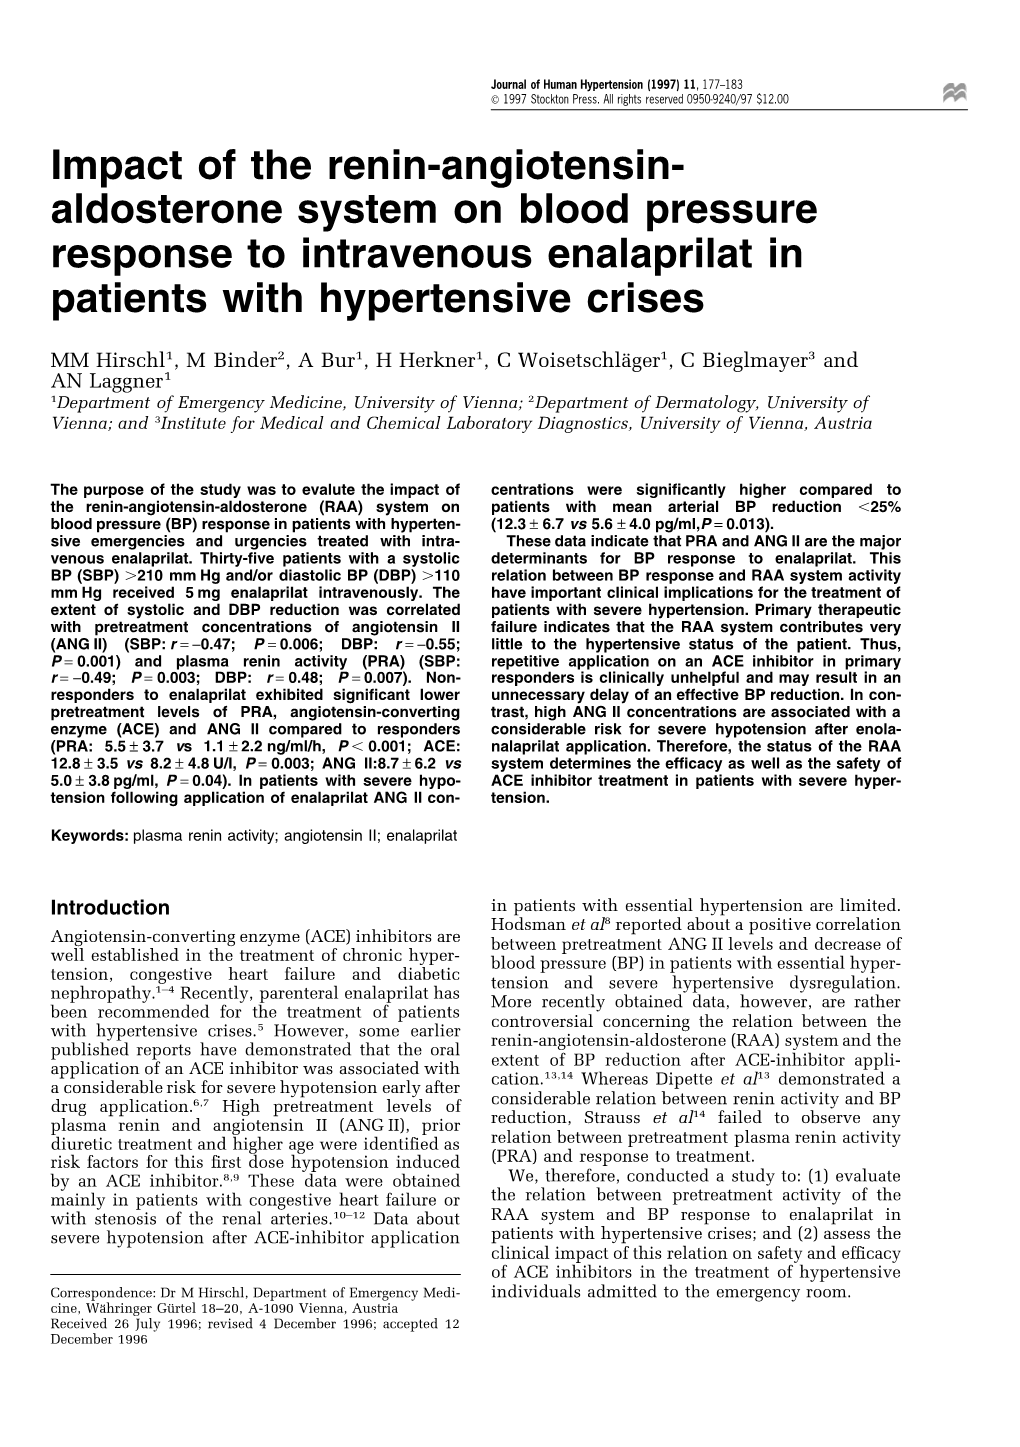 Impact of the Renin-Angiotensin- Aldosterone System on Blood Pressure Response to Intravenous Enalaprilat in Patients with Hypertensive Crises